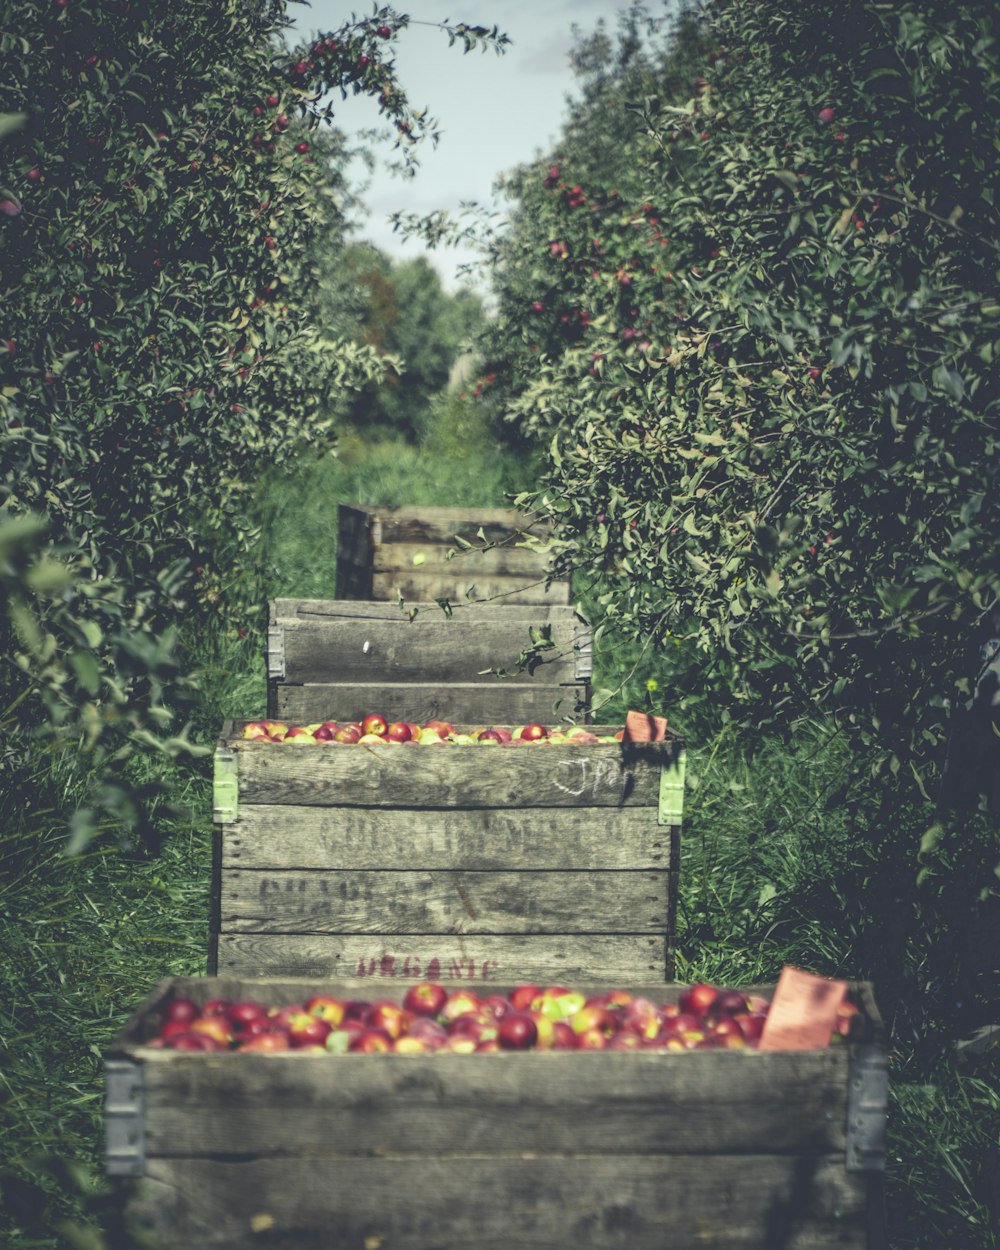 a row of wooden crates filled with apples